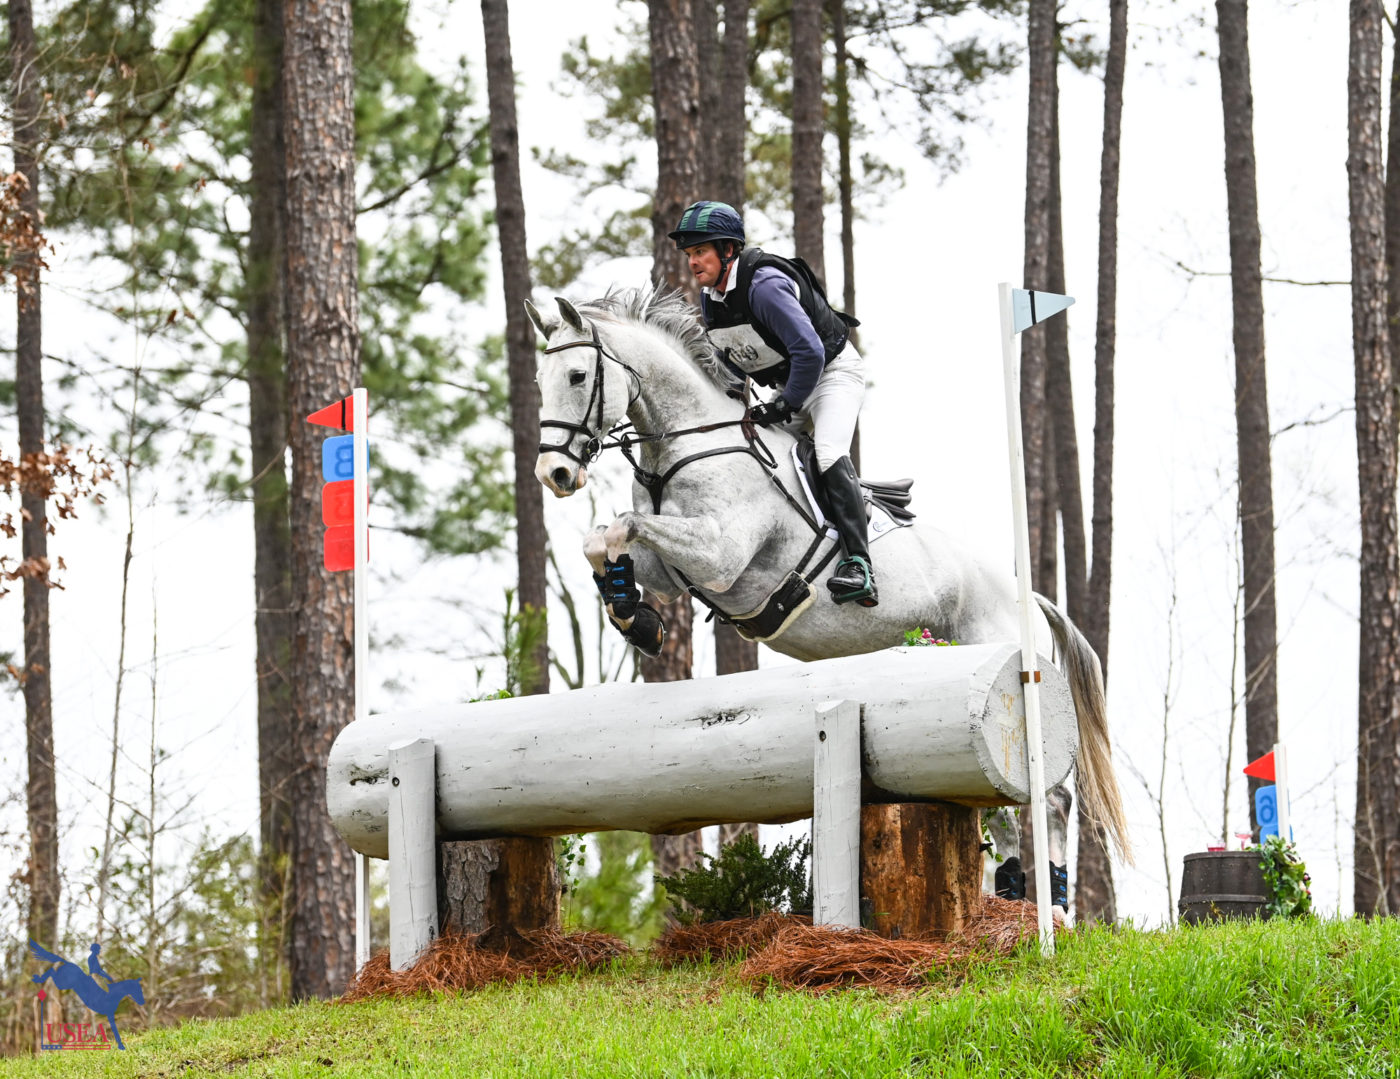 Conor Rollins and Prime Target jumped up the Normandy Bank in the CCI3*-S. USEA/Lindsay Berreth photo